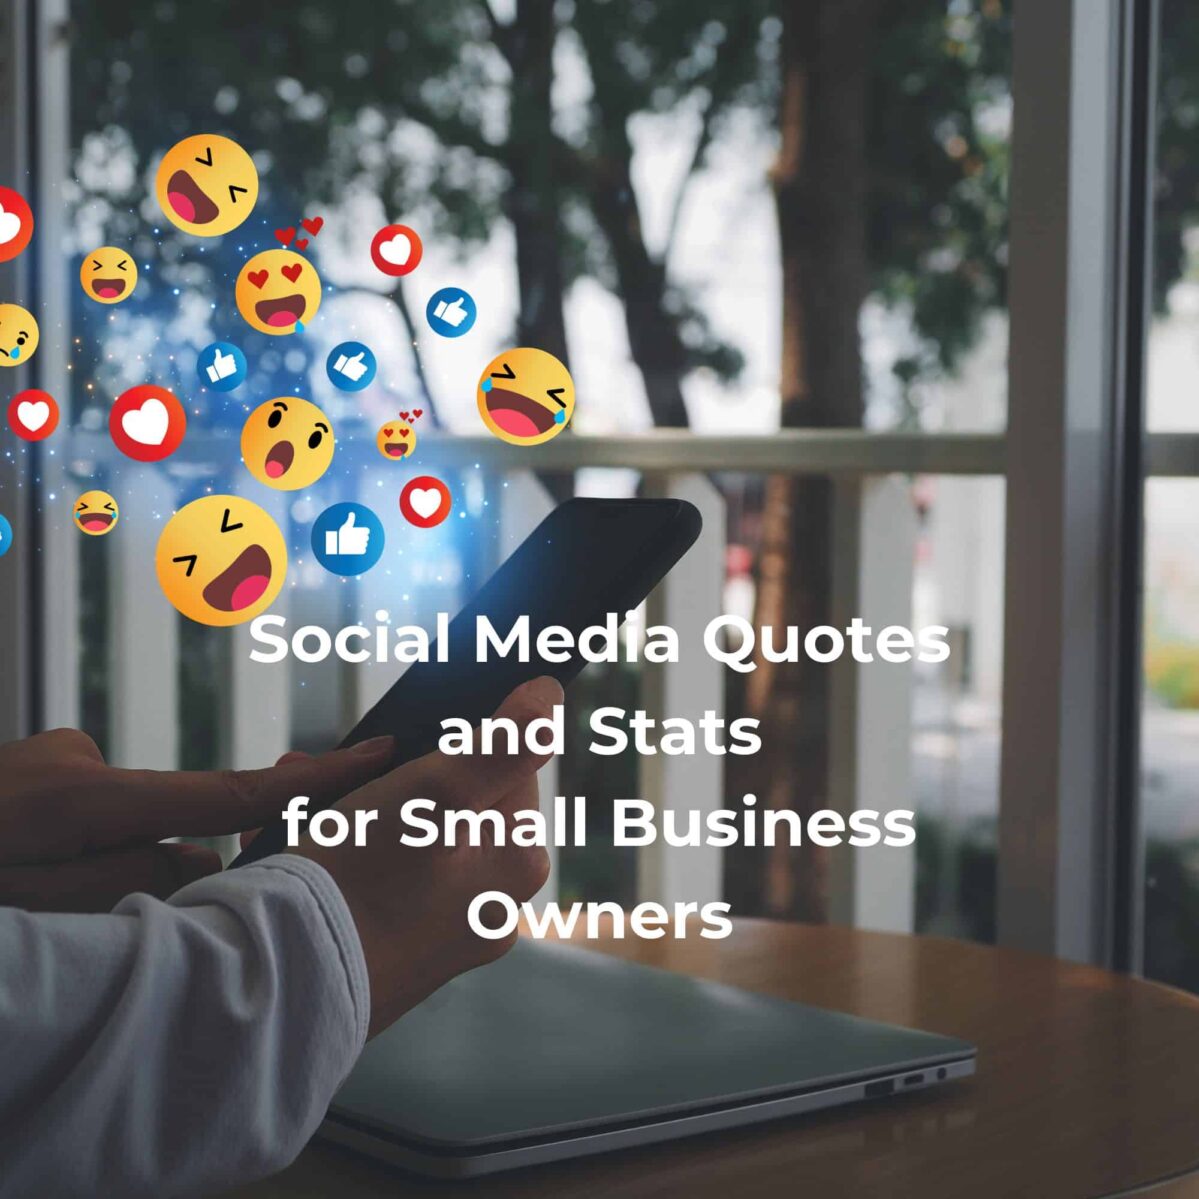 Social Media Quotes and Stats for Small Business Owners